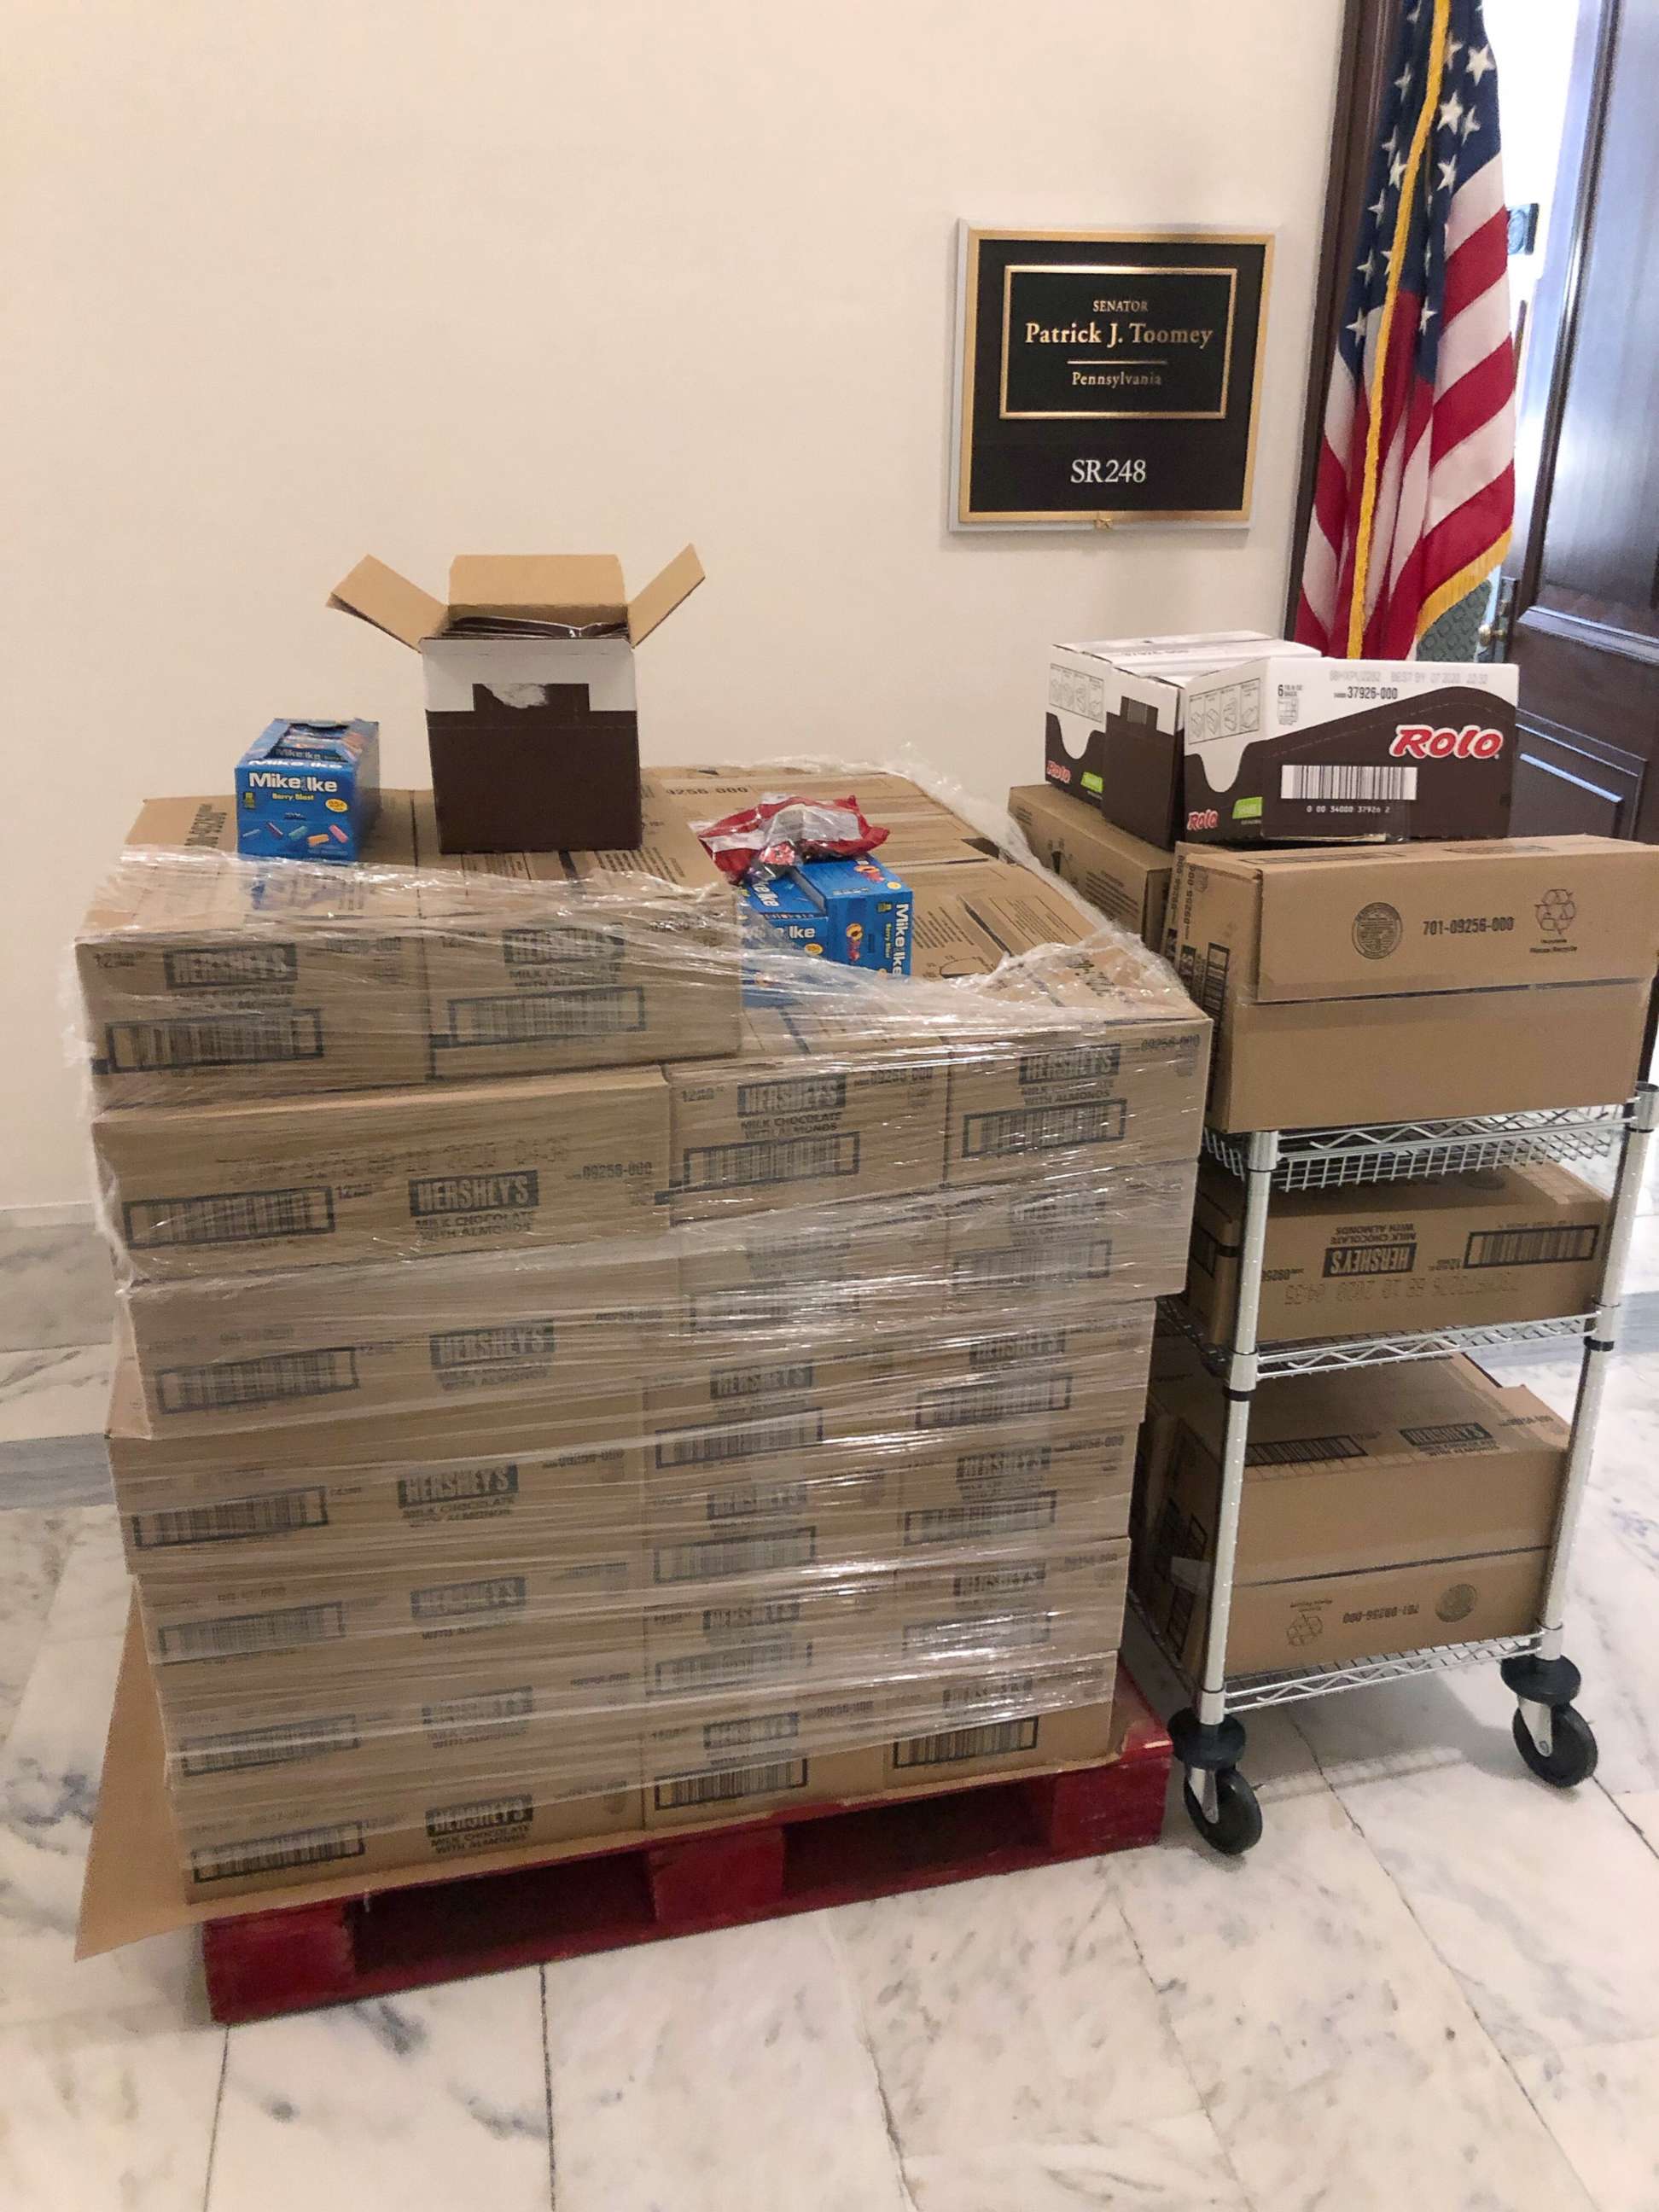 PHOTO: A candy delivery arrives at the office of Sen. Pat Toomey, Jan. 24, 2020, at the U.S. Capitol, during the impeachment trial. The deliveries have increased from semi-monthly to daily during the hearings.